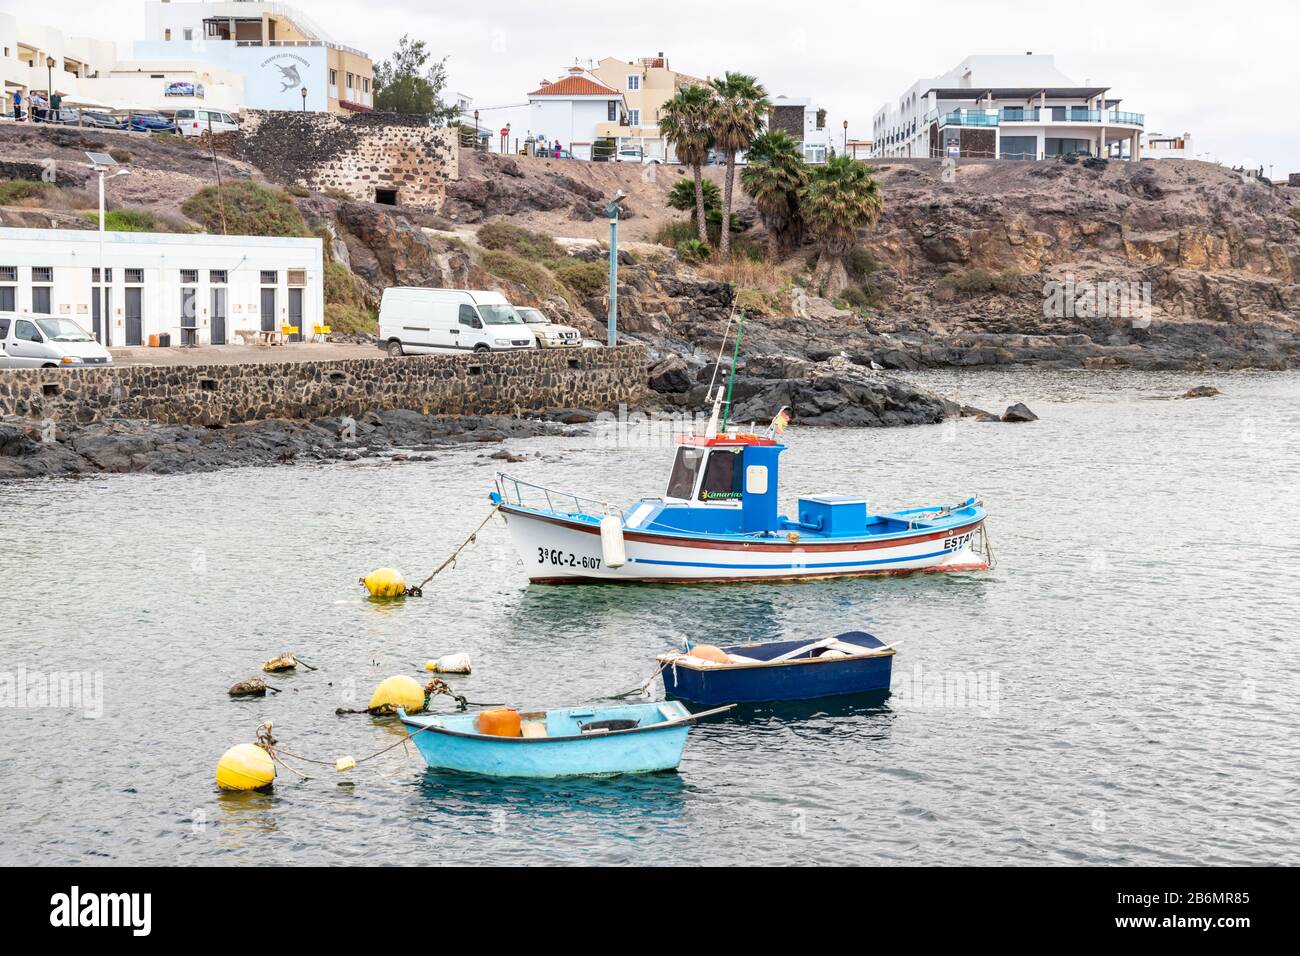 A fishing boat in the harbour at El Cotillo on the Canary Island of Fuerteventura Stock Photo